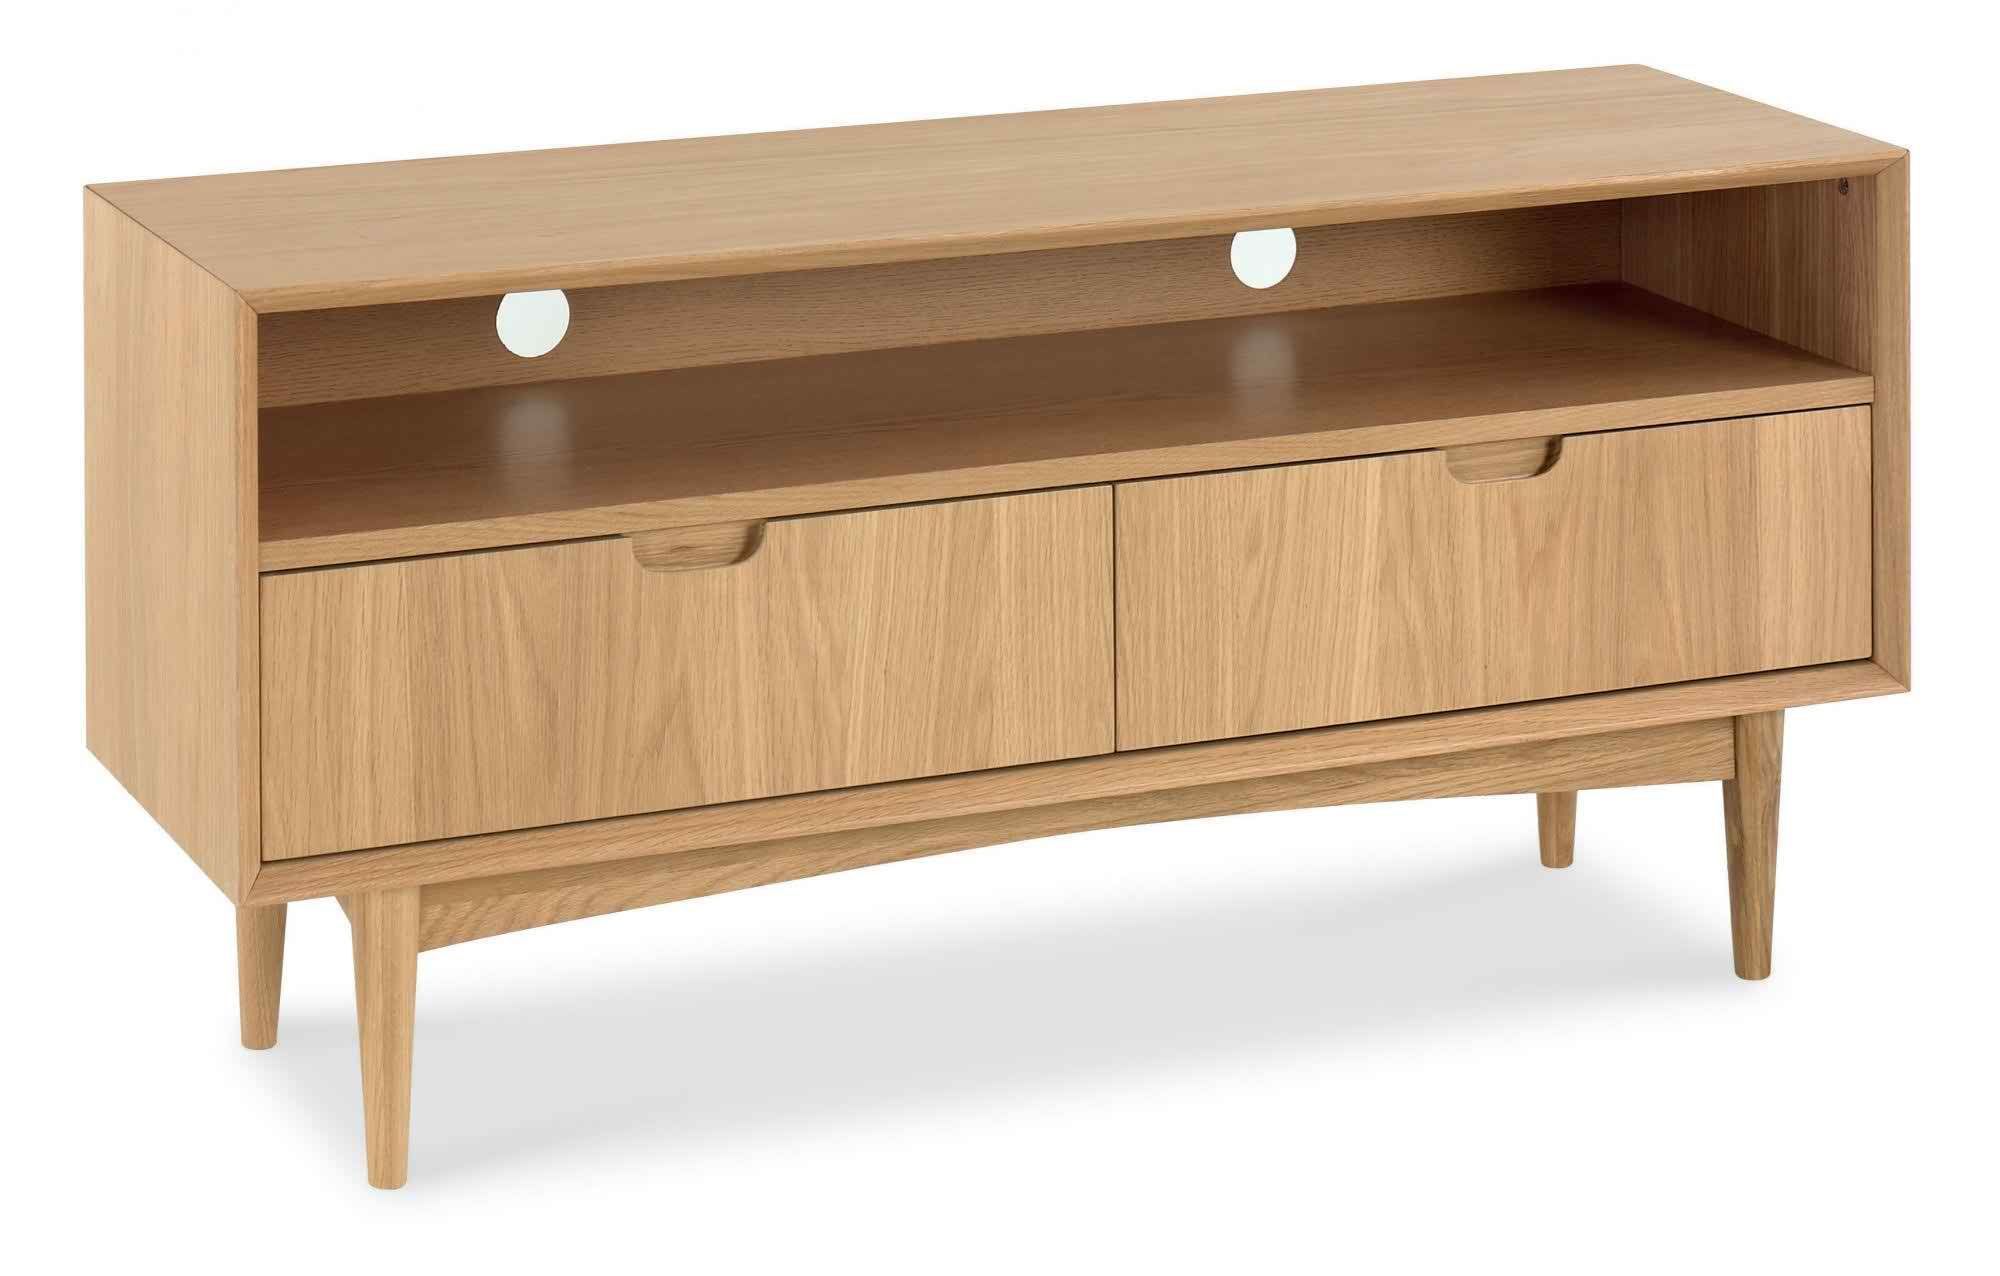 Bentley Designs Oslo Oak Entertainment Unit |first Intended For Bromley Extra Wide Oak Tv Stands (View 10 of 15)